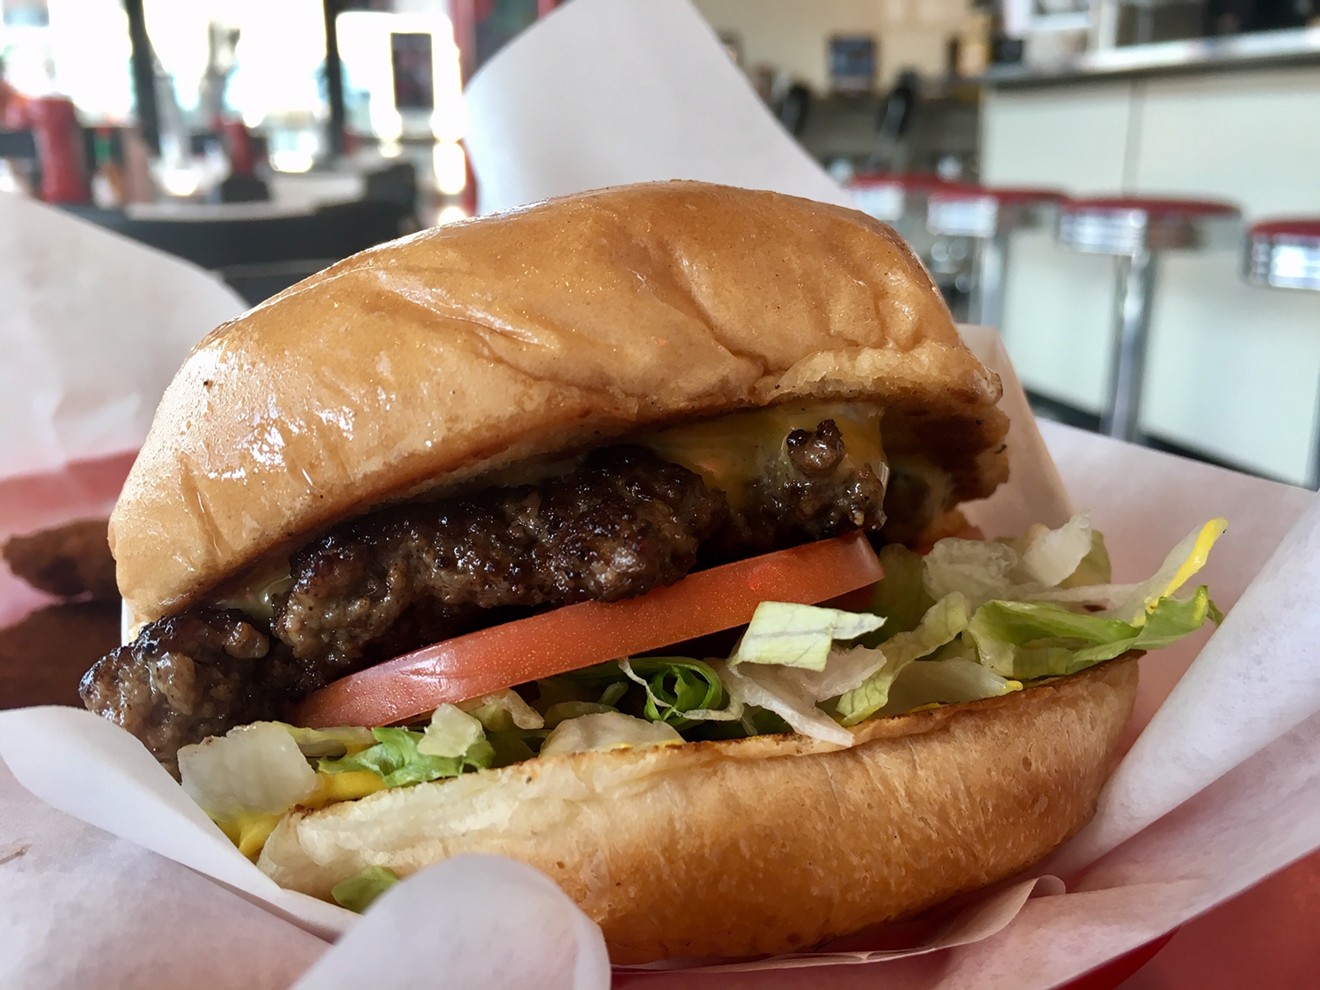 A classic cheeseburger for $5.05 at Hunky's Cedar Springs location. There's a second location in Bishop Arts.